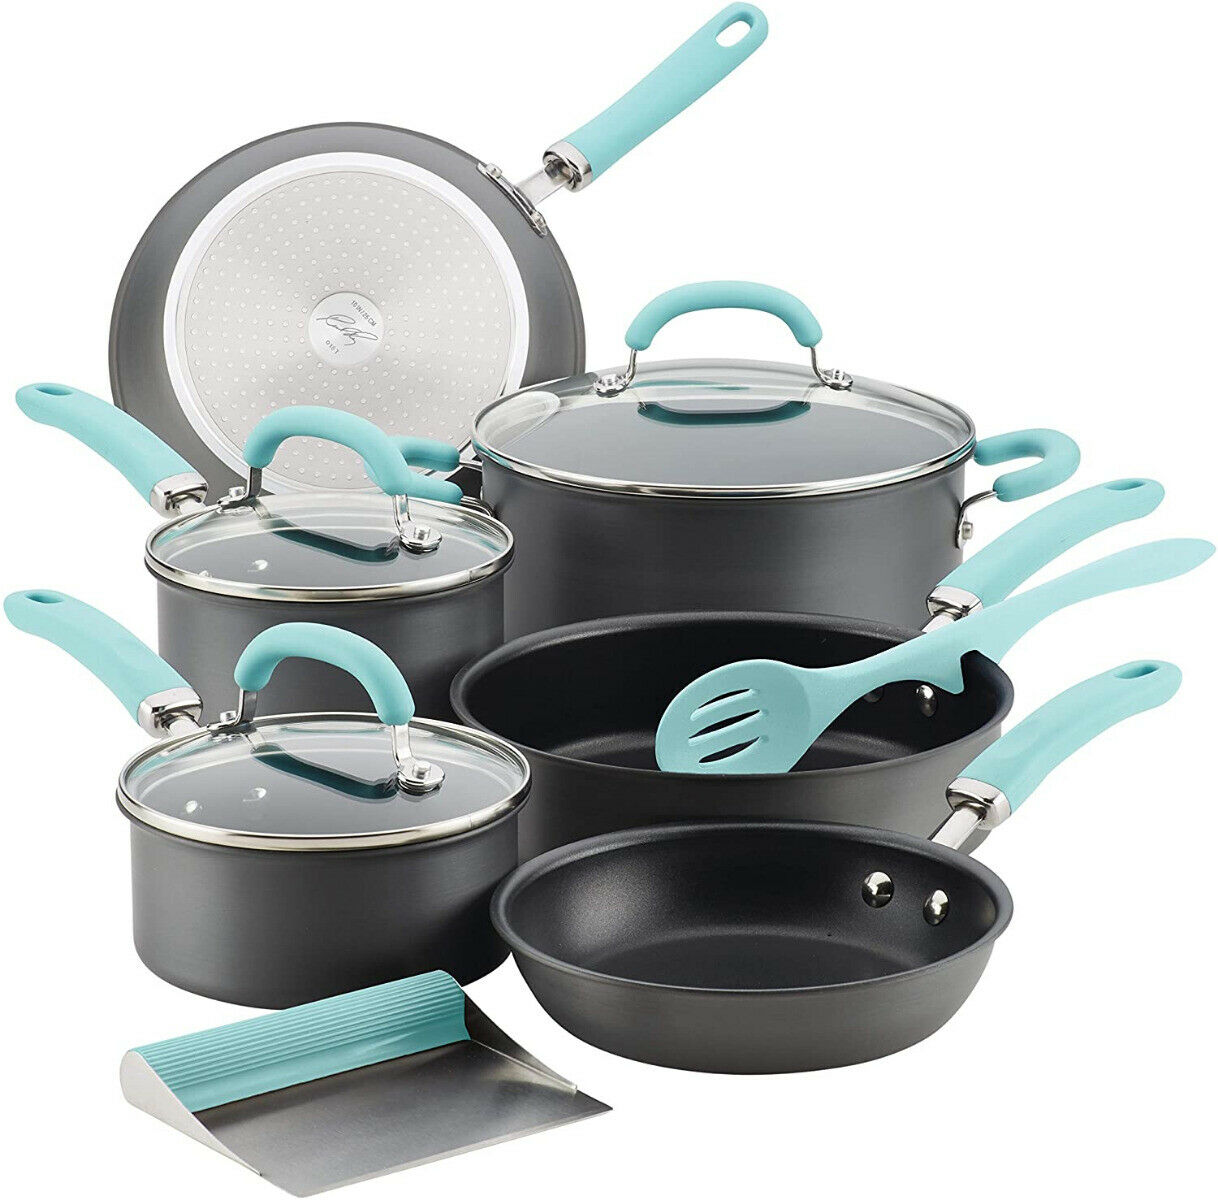 Rachael Ray Create Delicious Hard-Anodized 11-Piece Cookware Set (Open Box)